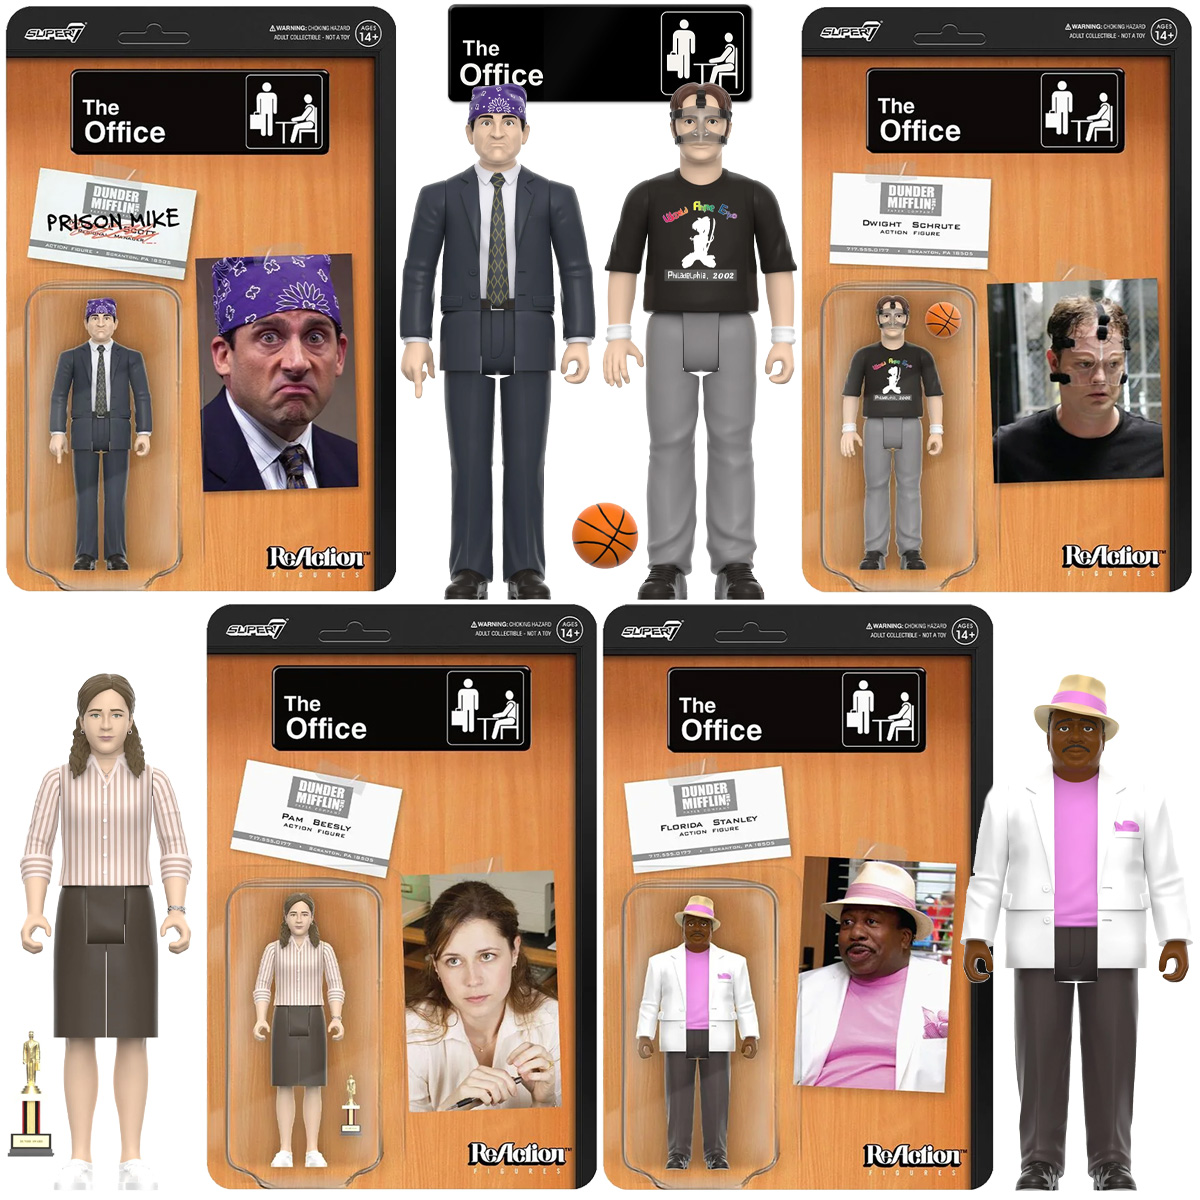 Action Figures ReAction The Office